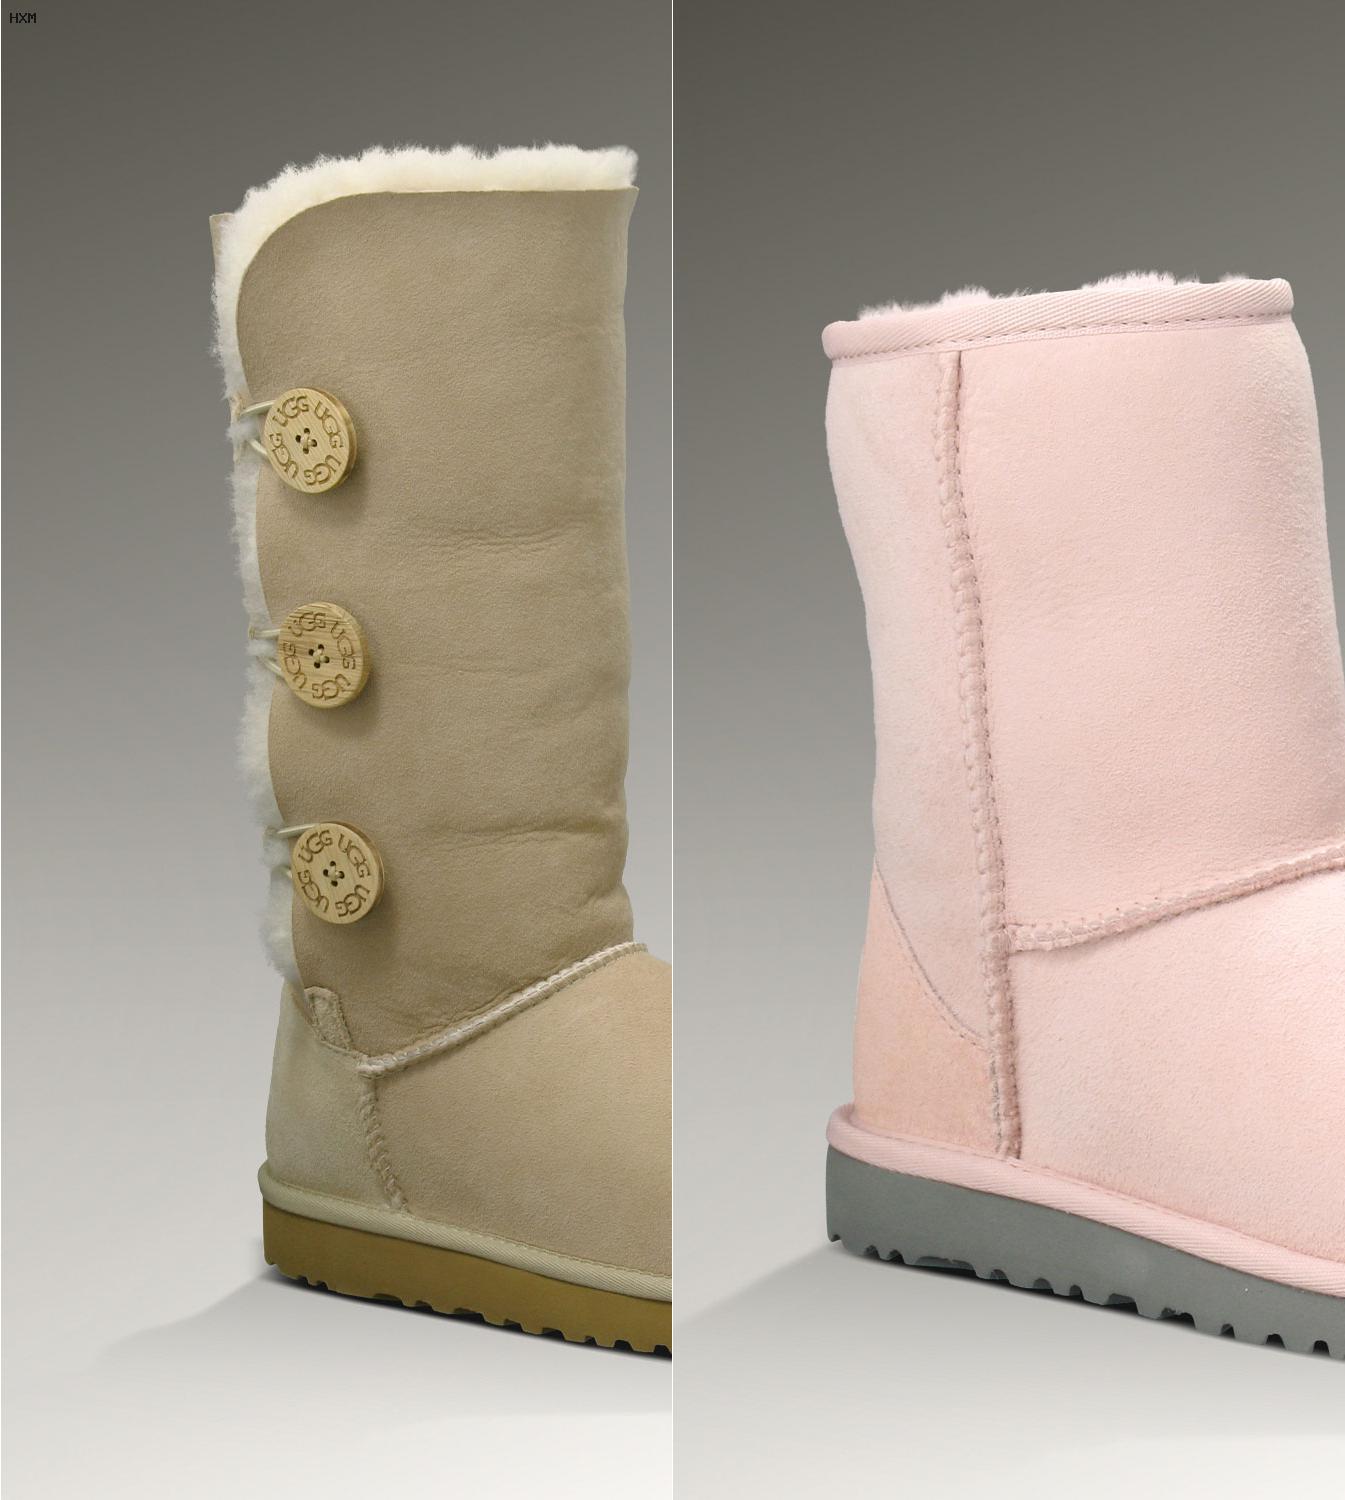 ugg mini bailey bow soldes